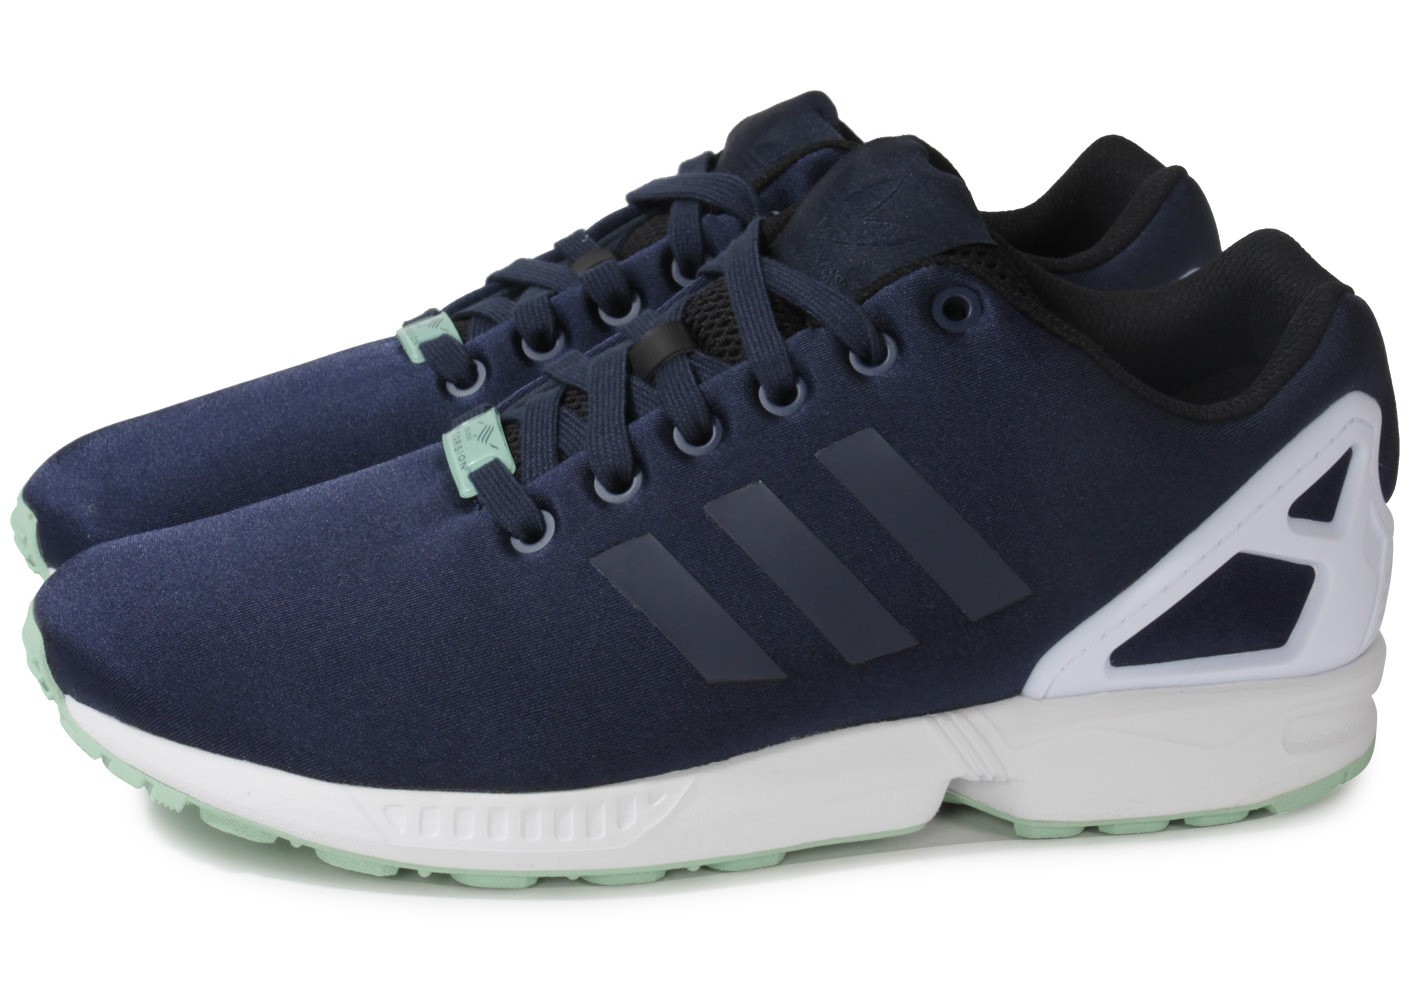 adidas zx 400 homme 2015